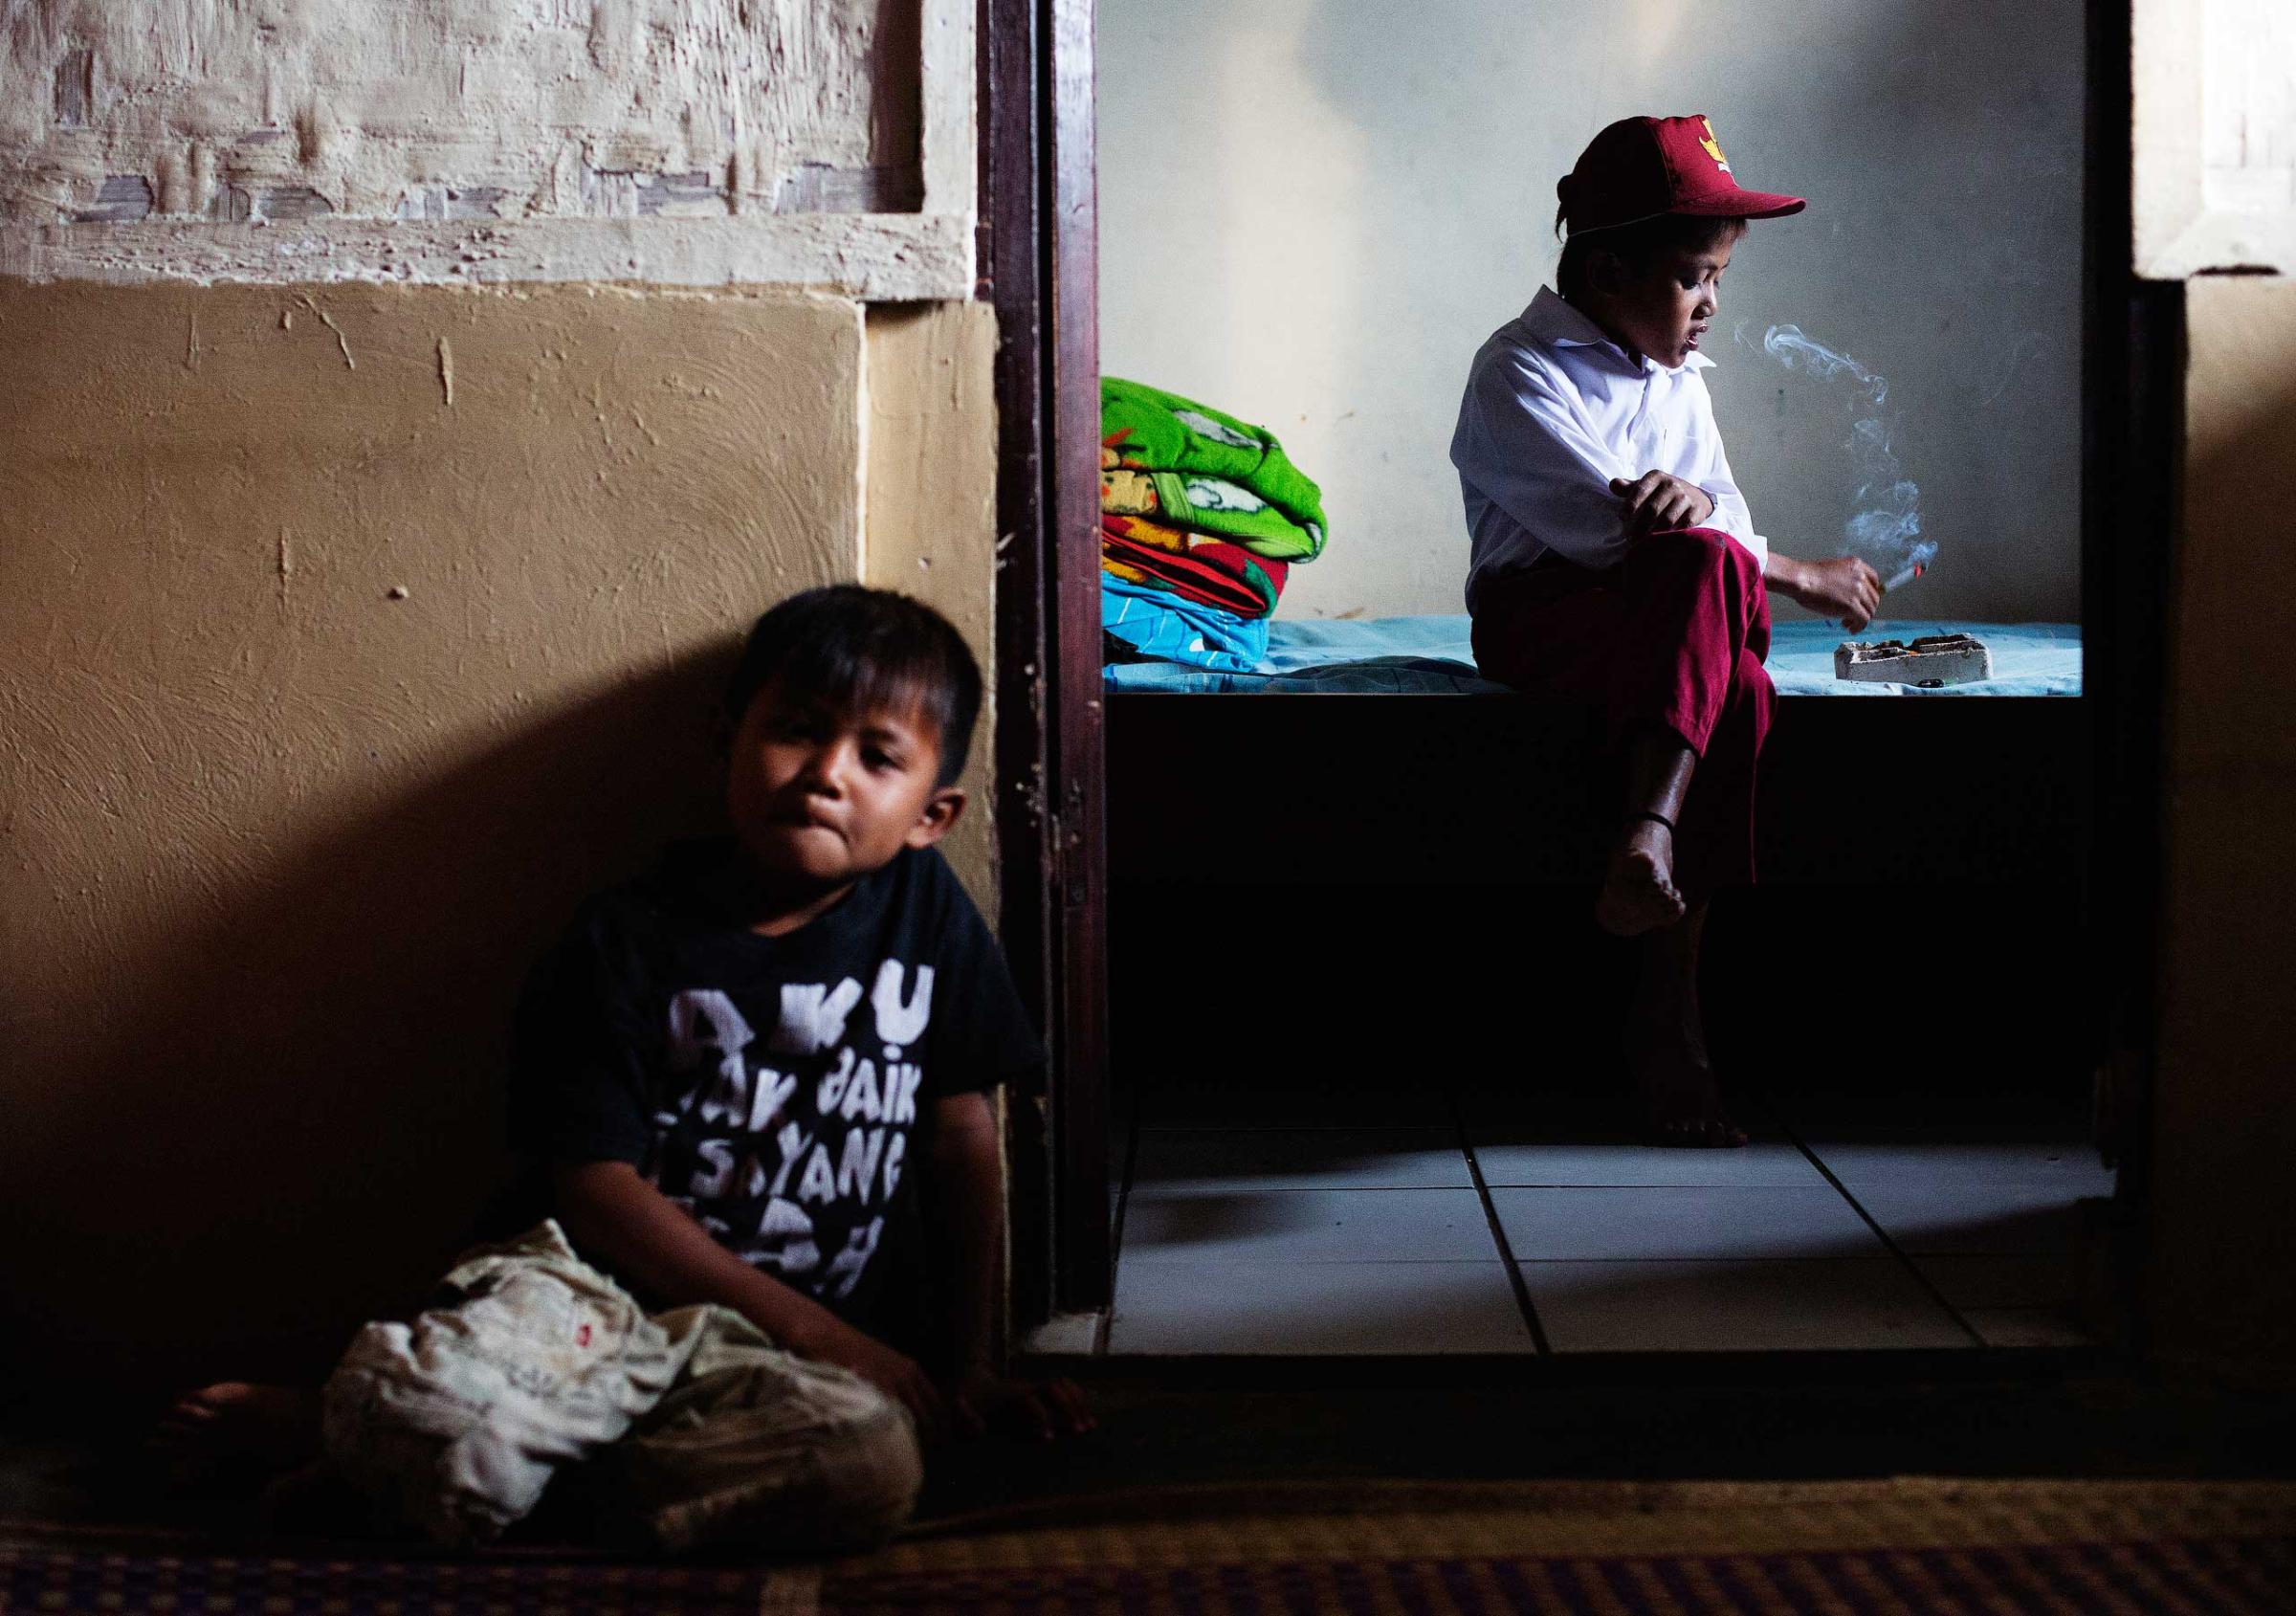 Ilham Hadi, who has smoked up to two packs a day and began when he was four years old, poses for a photo wearing his third grade uniform while smoking in his bedroom as his younger brother looks on in their village near the town of Sukabumi, Indonesia on February 14, 2014.